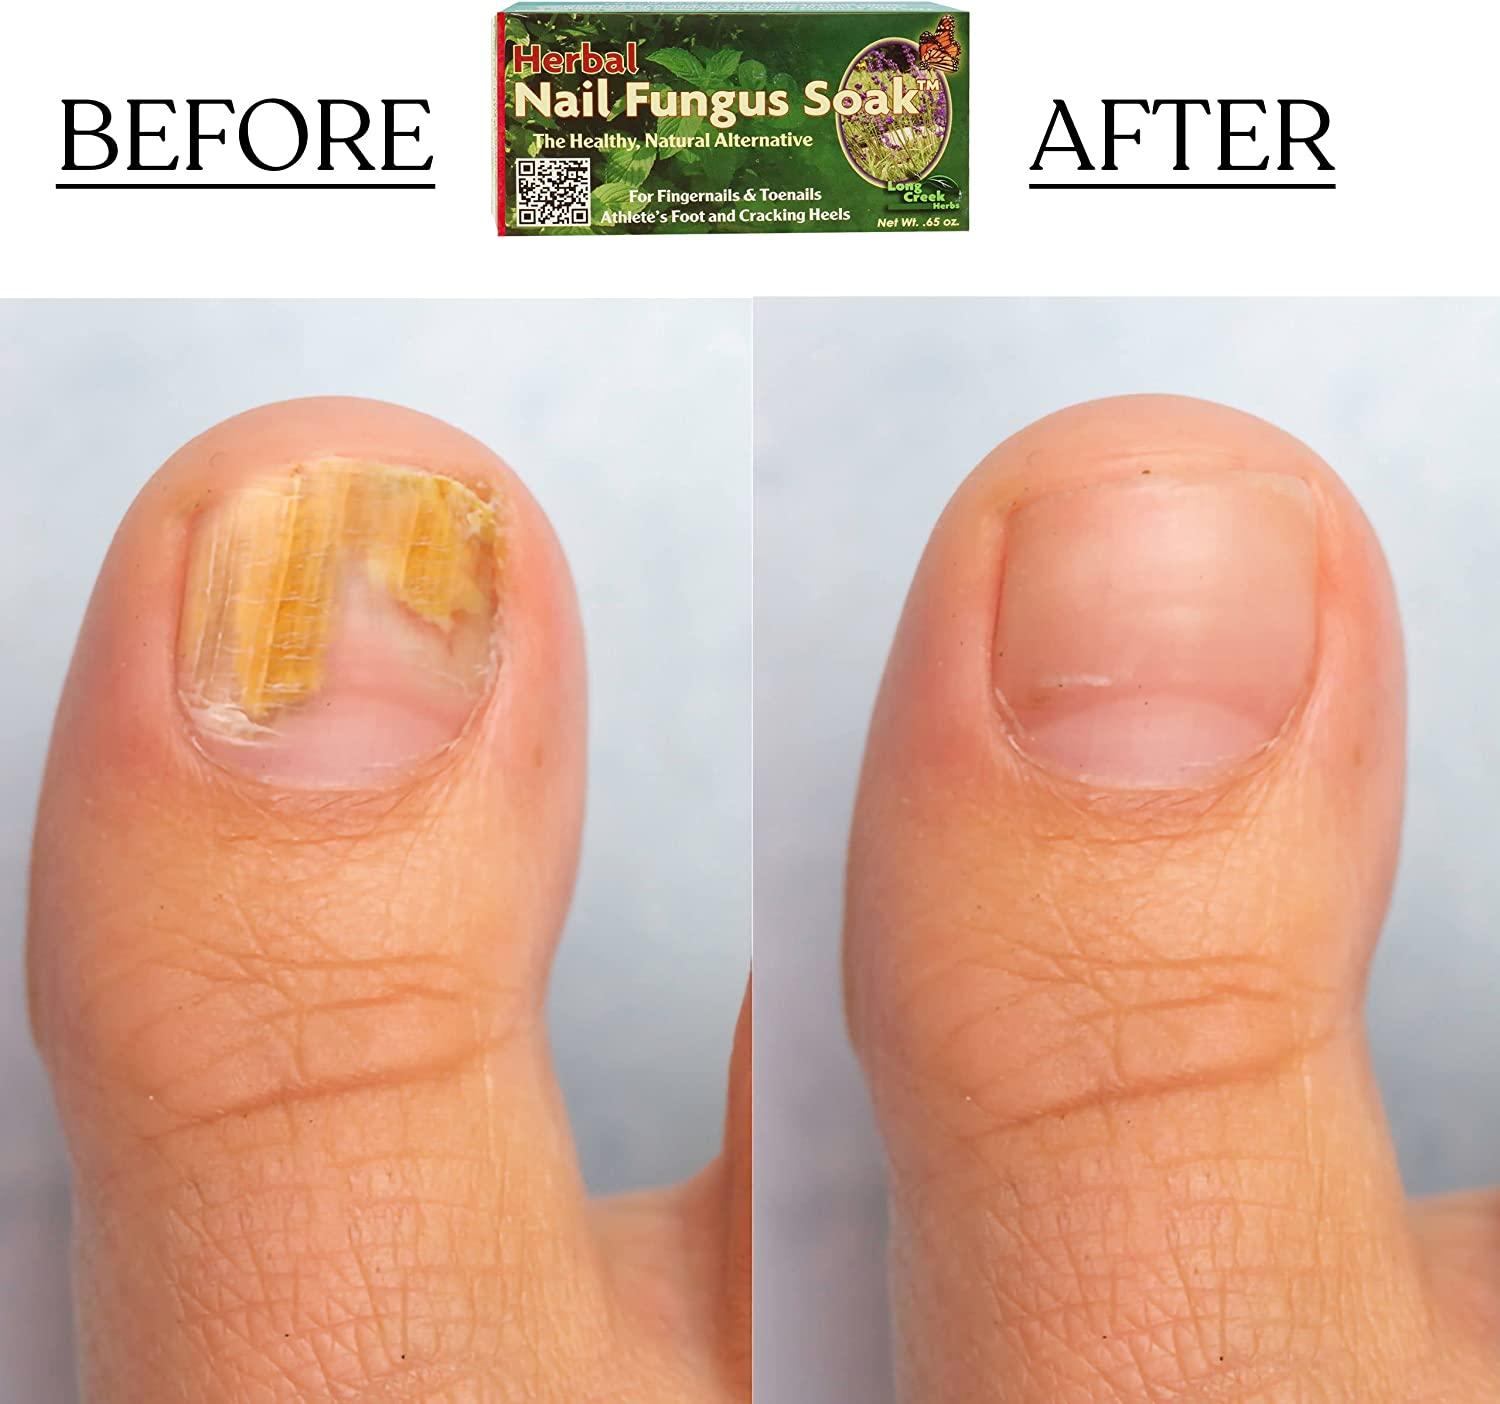 Nail Fungus Soak - Natural Topical Toenail and Fingernail Solution - Fight  Cracked Heels and Athlete's Foot - Hypoallergenic Daily Fungus Remover for  Feet and Hands